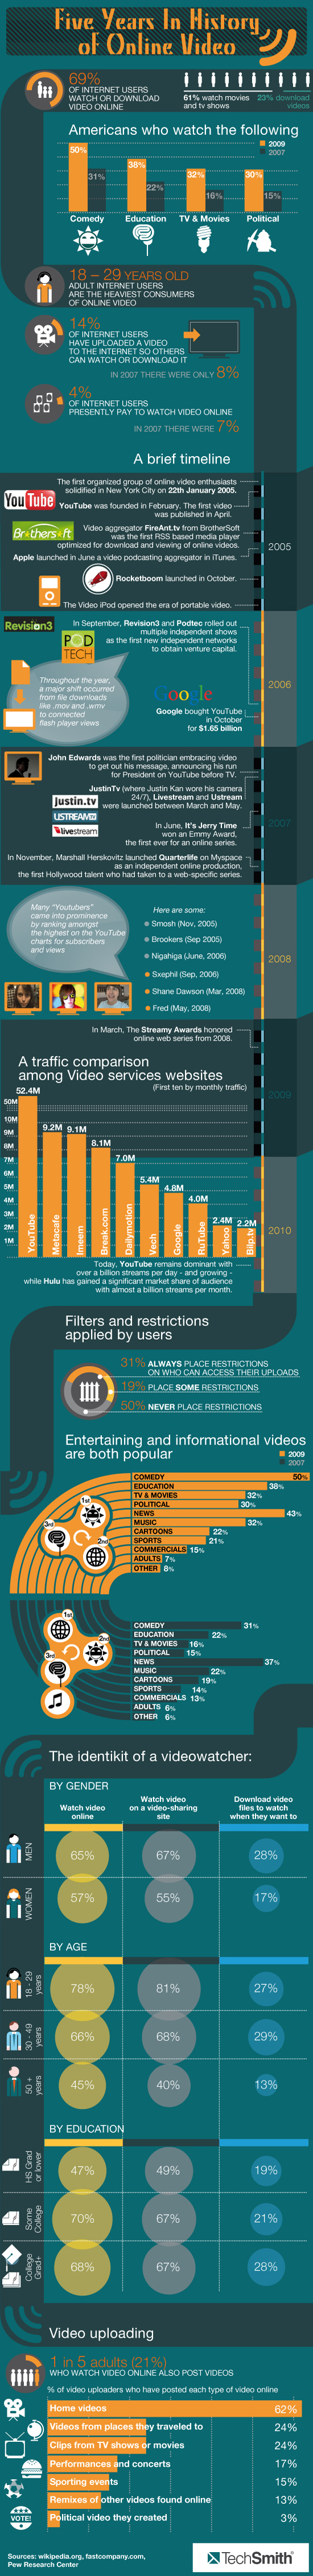 History of Online Video Infographic